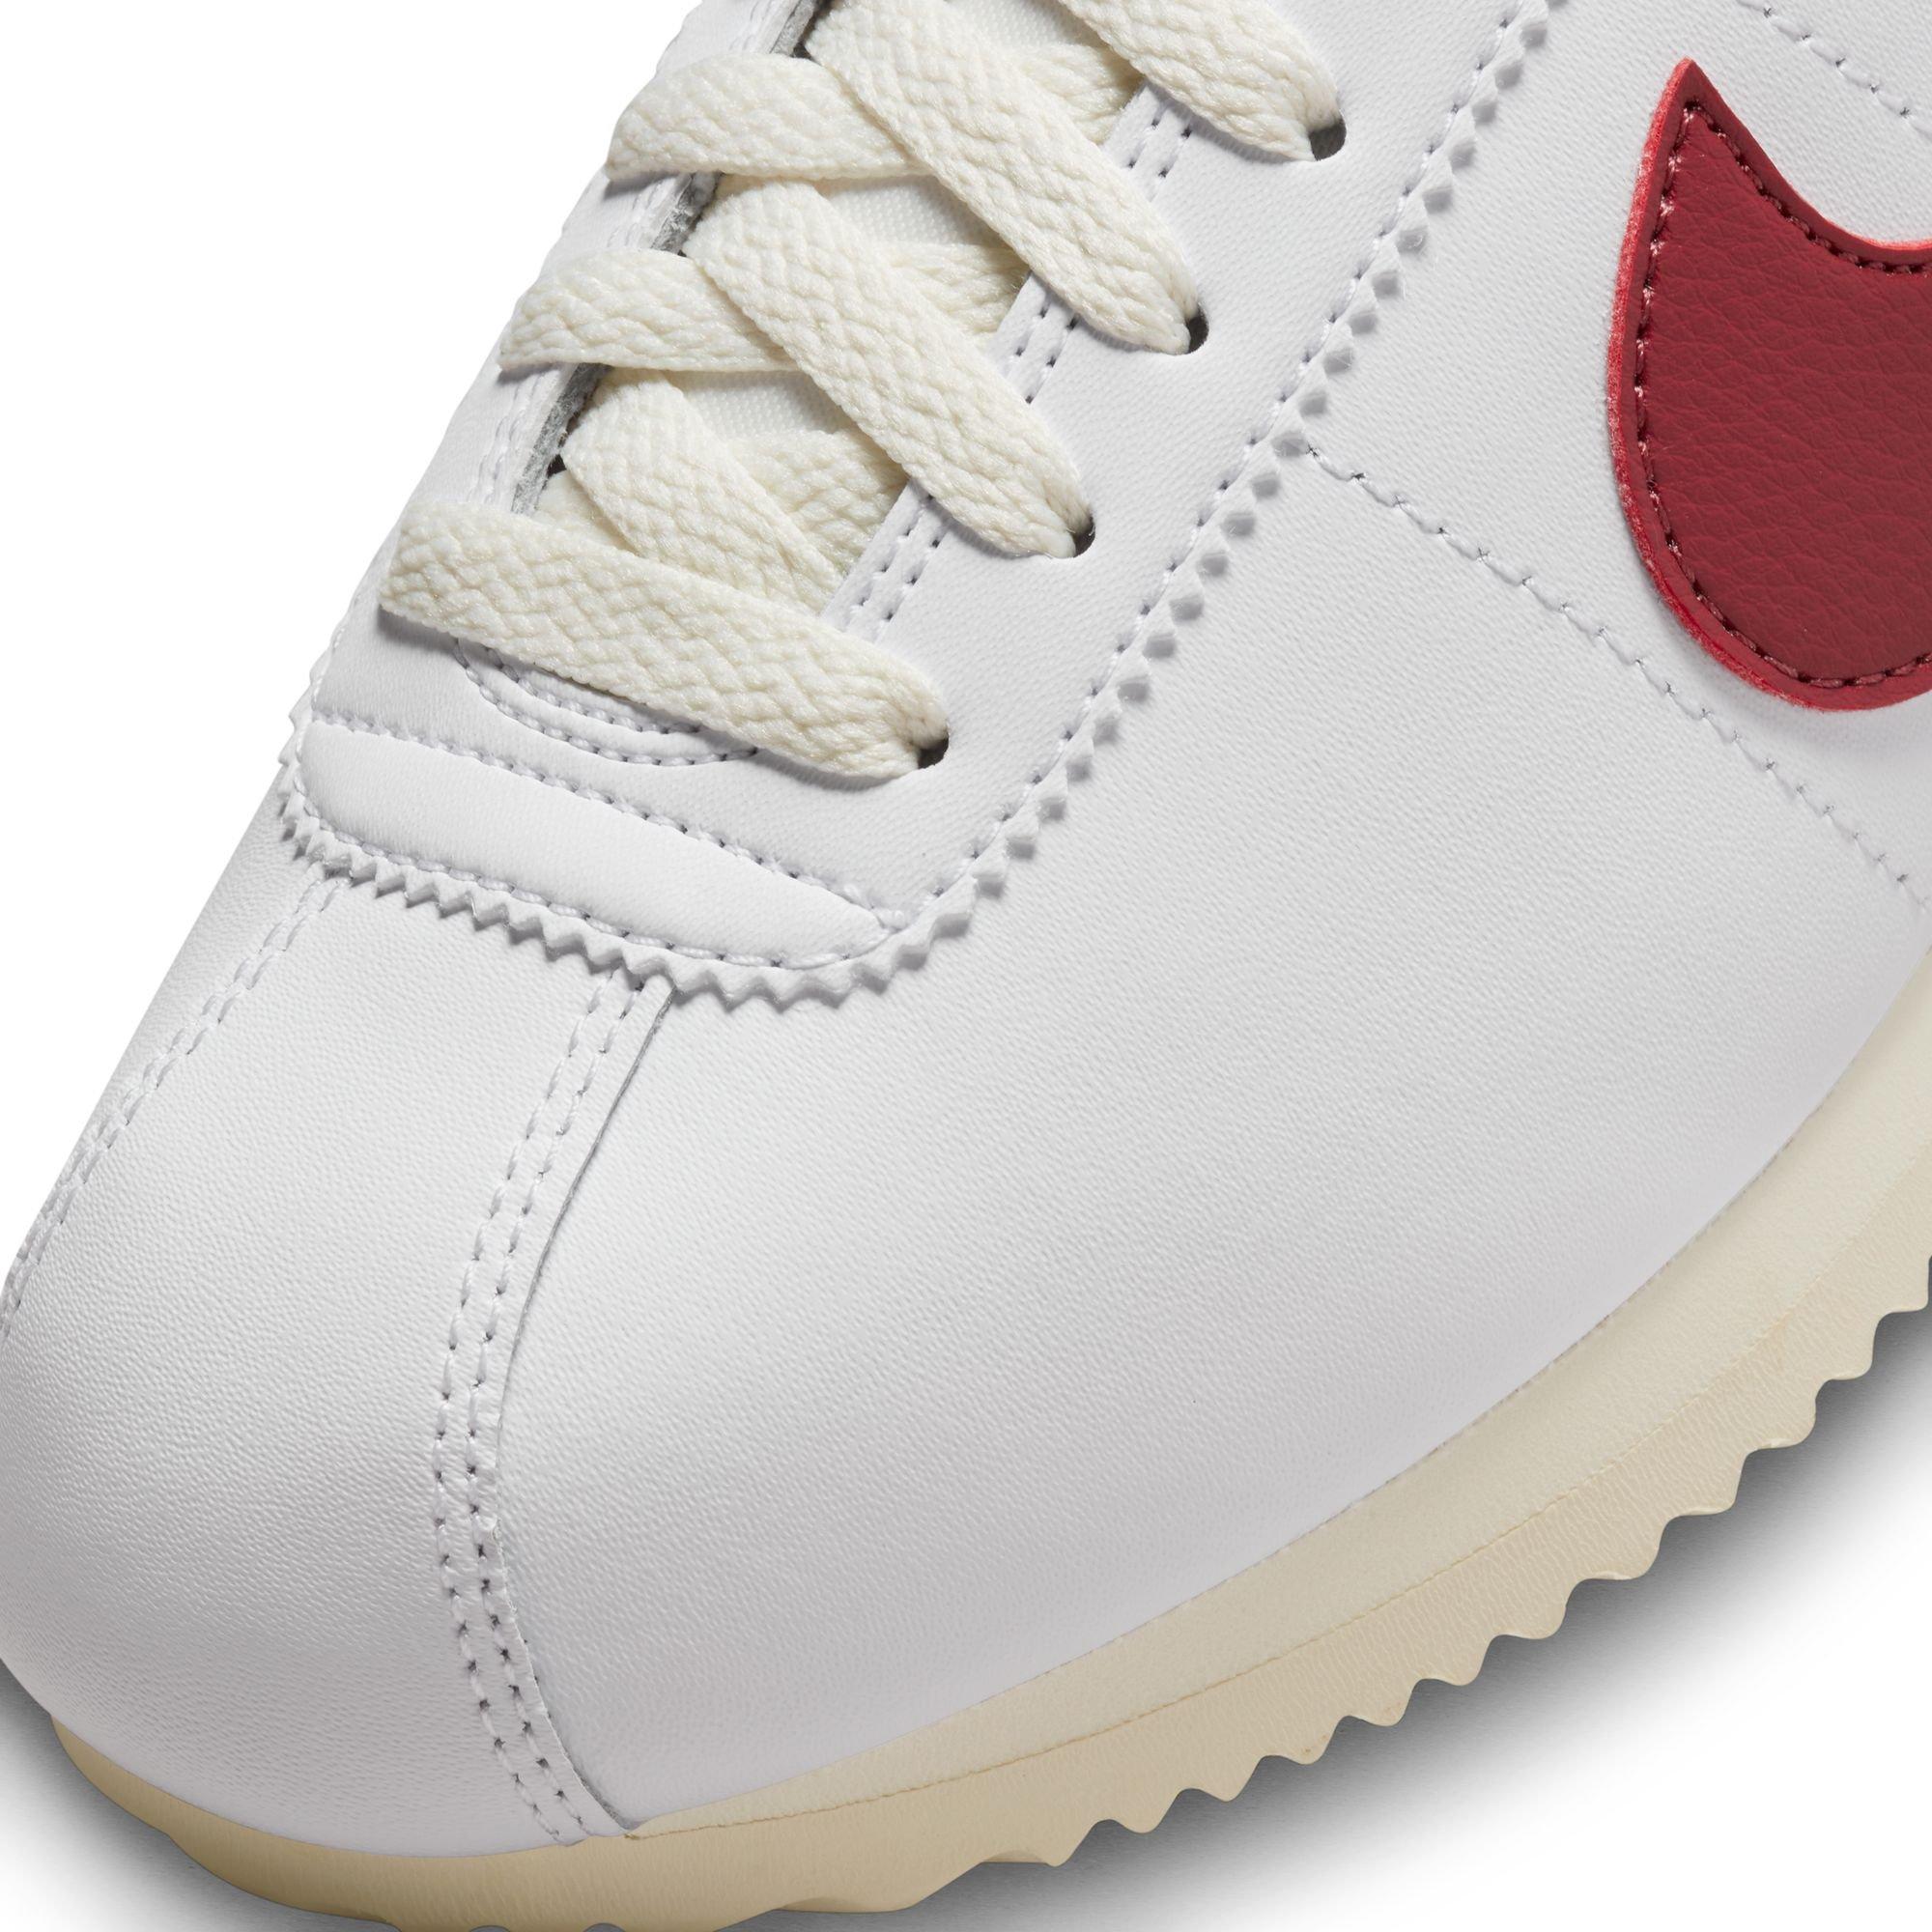 Nike Women's Classic Cortez Leather White/Red/Royal